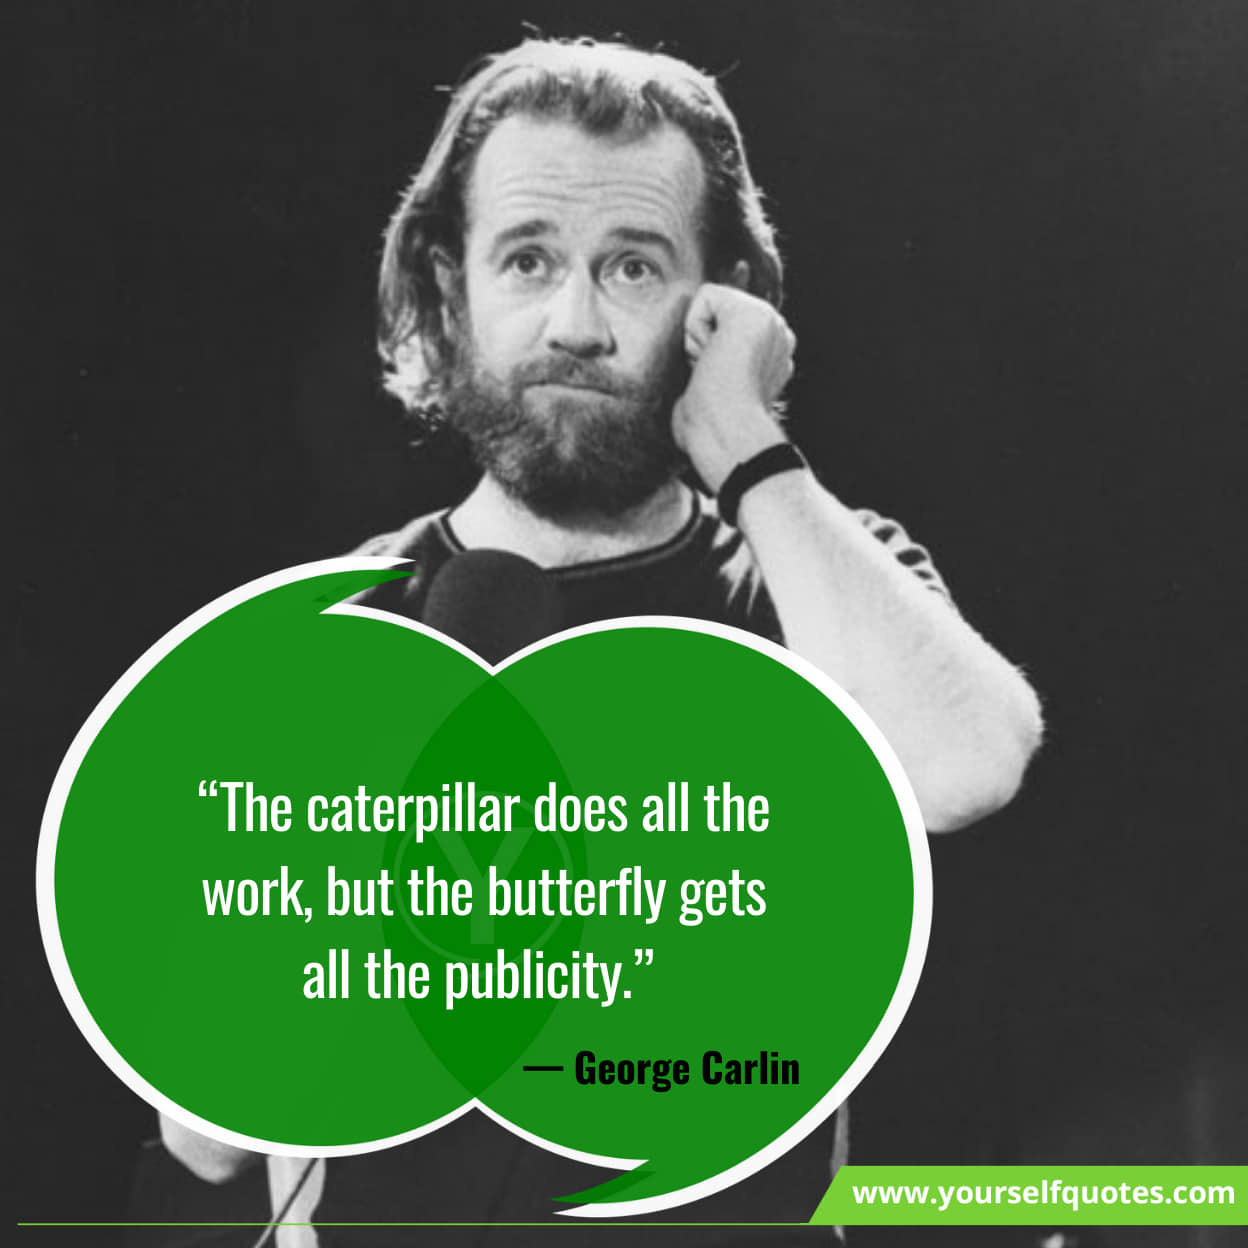 Quotes About Carlin's stand-up performances